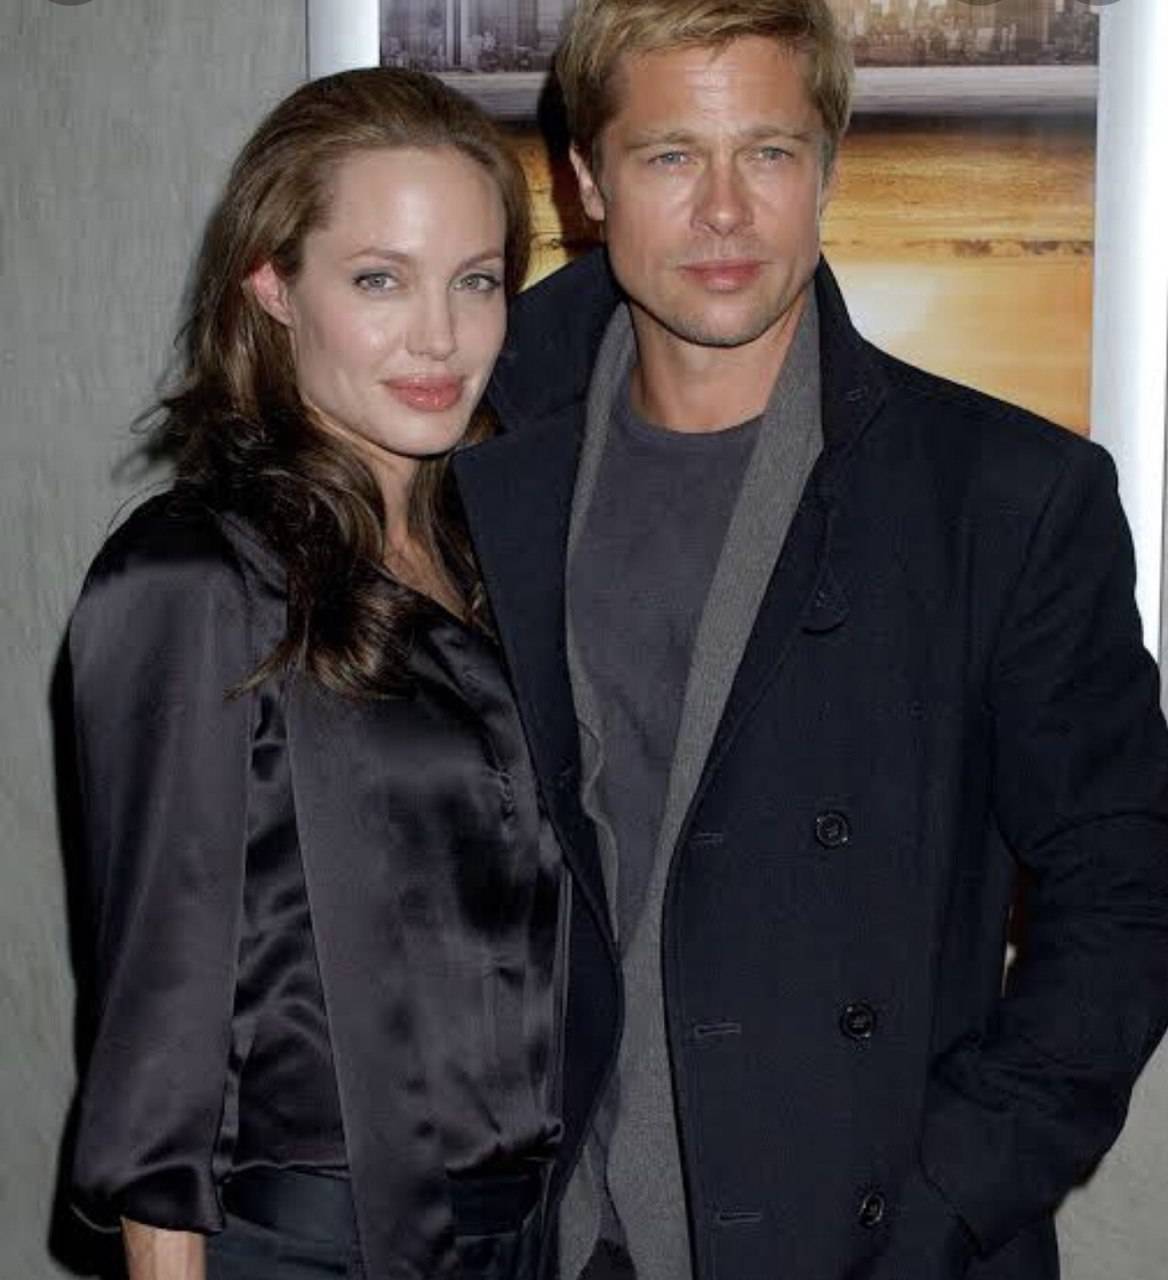 Brad Pitt and Angelina Jolie's Latest Court Battle Is Over Their $164 Million Chateau Miraval